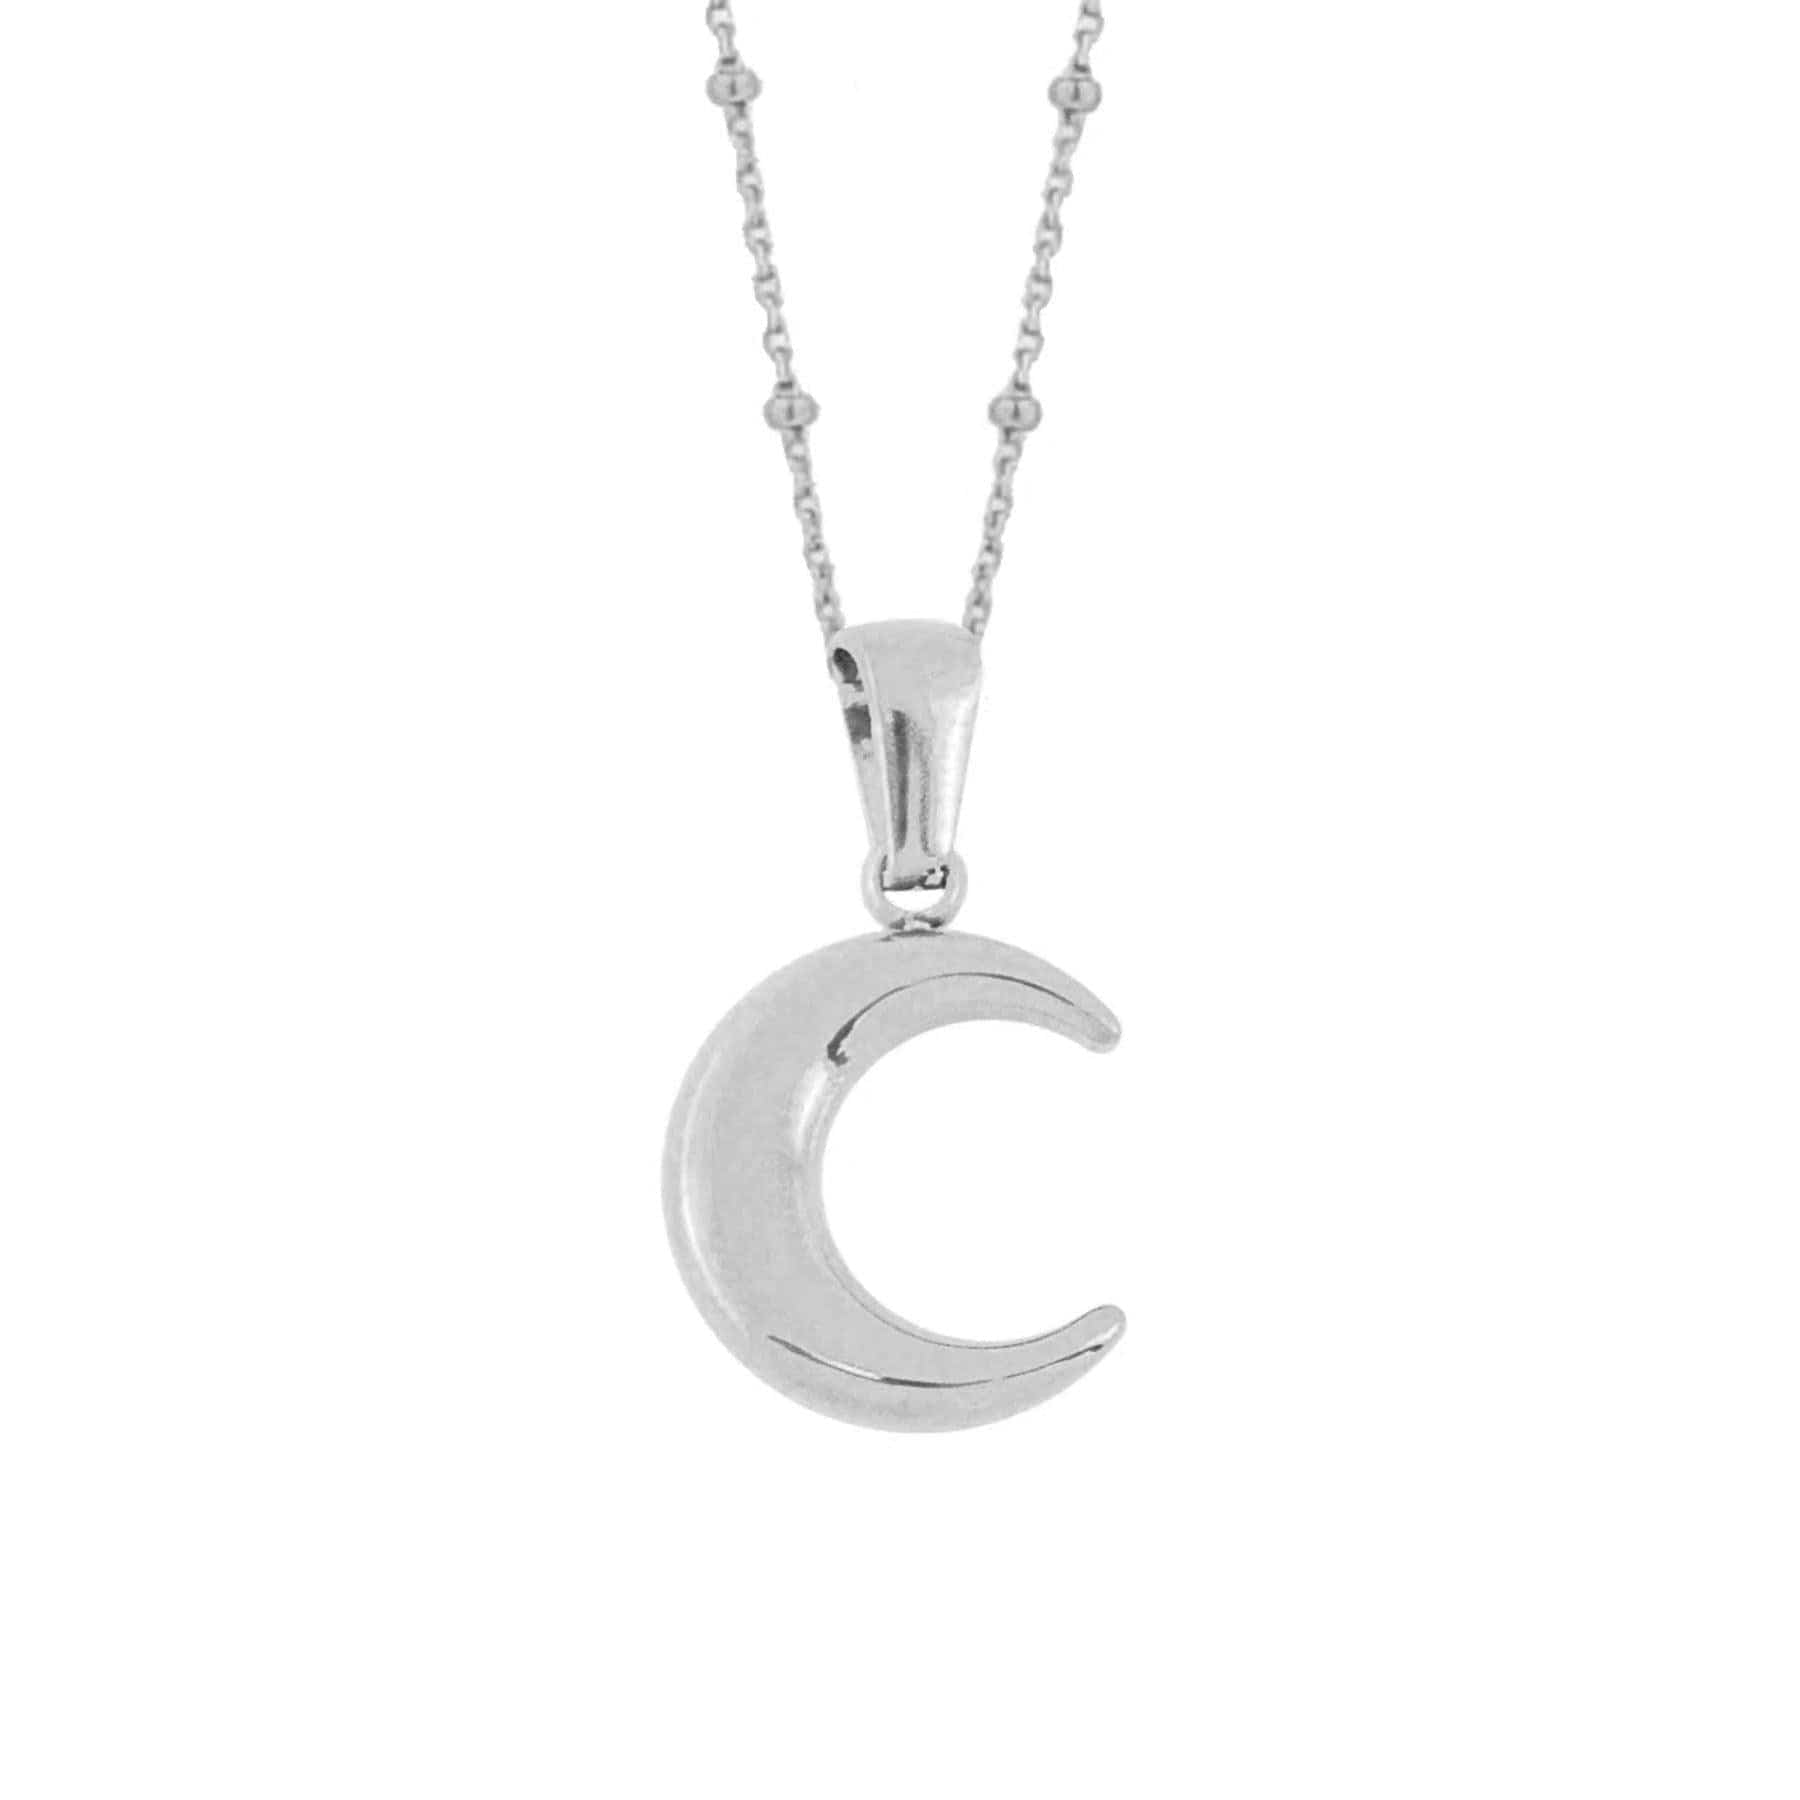 BOHOMOON Stainless Steel Moonlight Necklace Silver